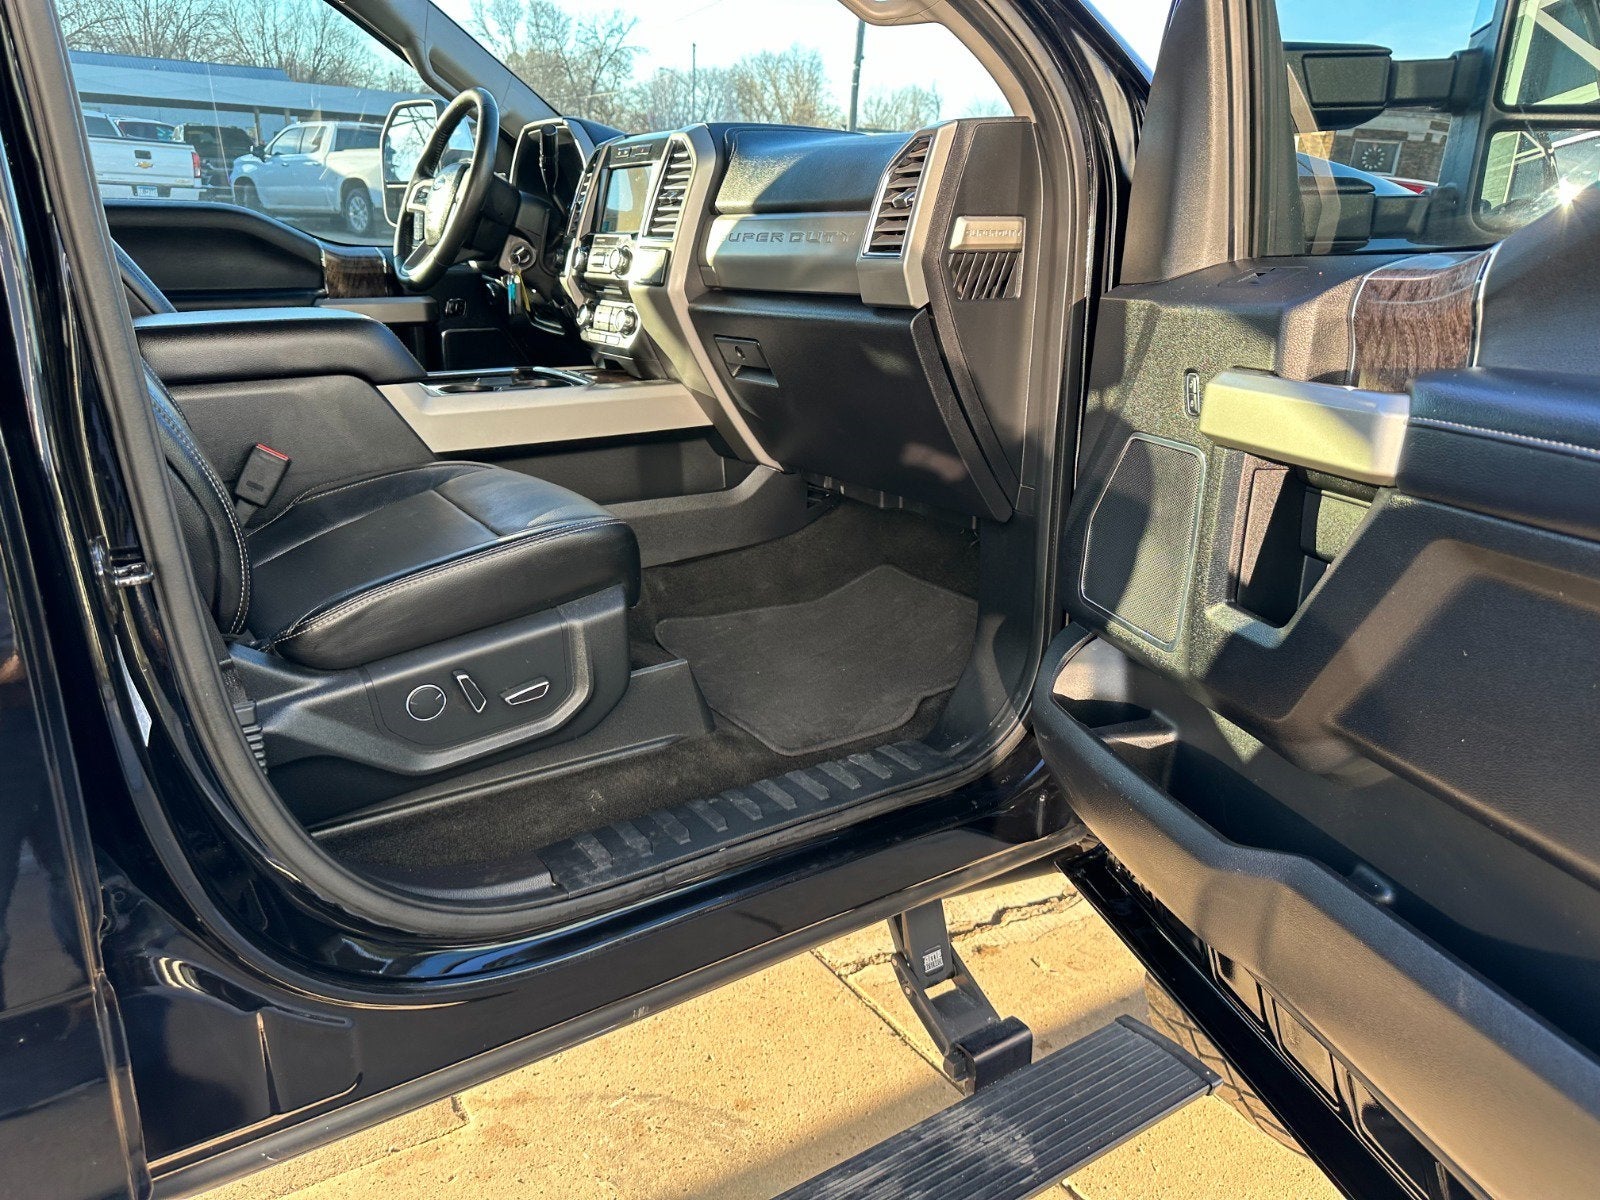 2017 Ford F-350 Lariat, Powerstroke Diesel, Power Boards, Heated & Vented Seats